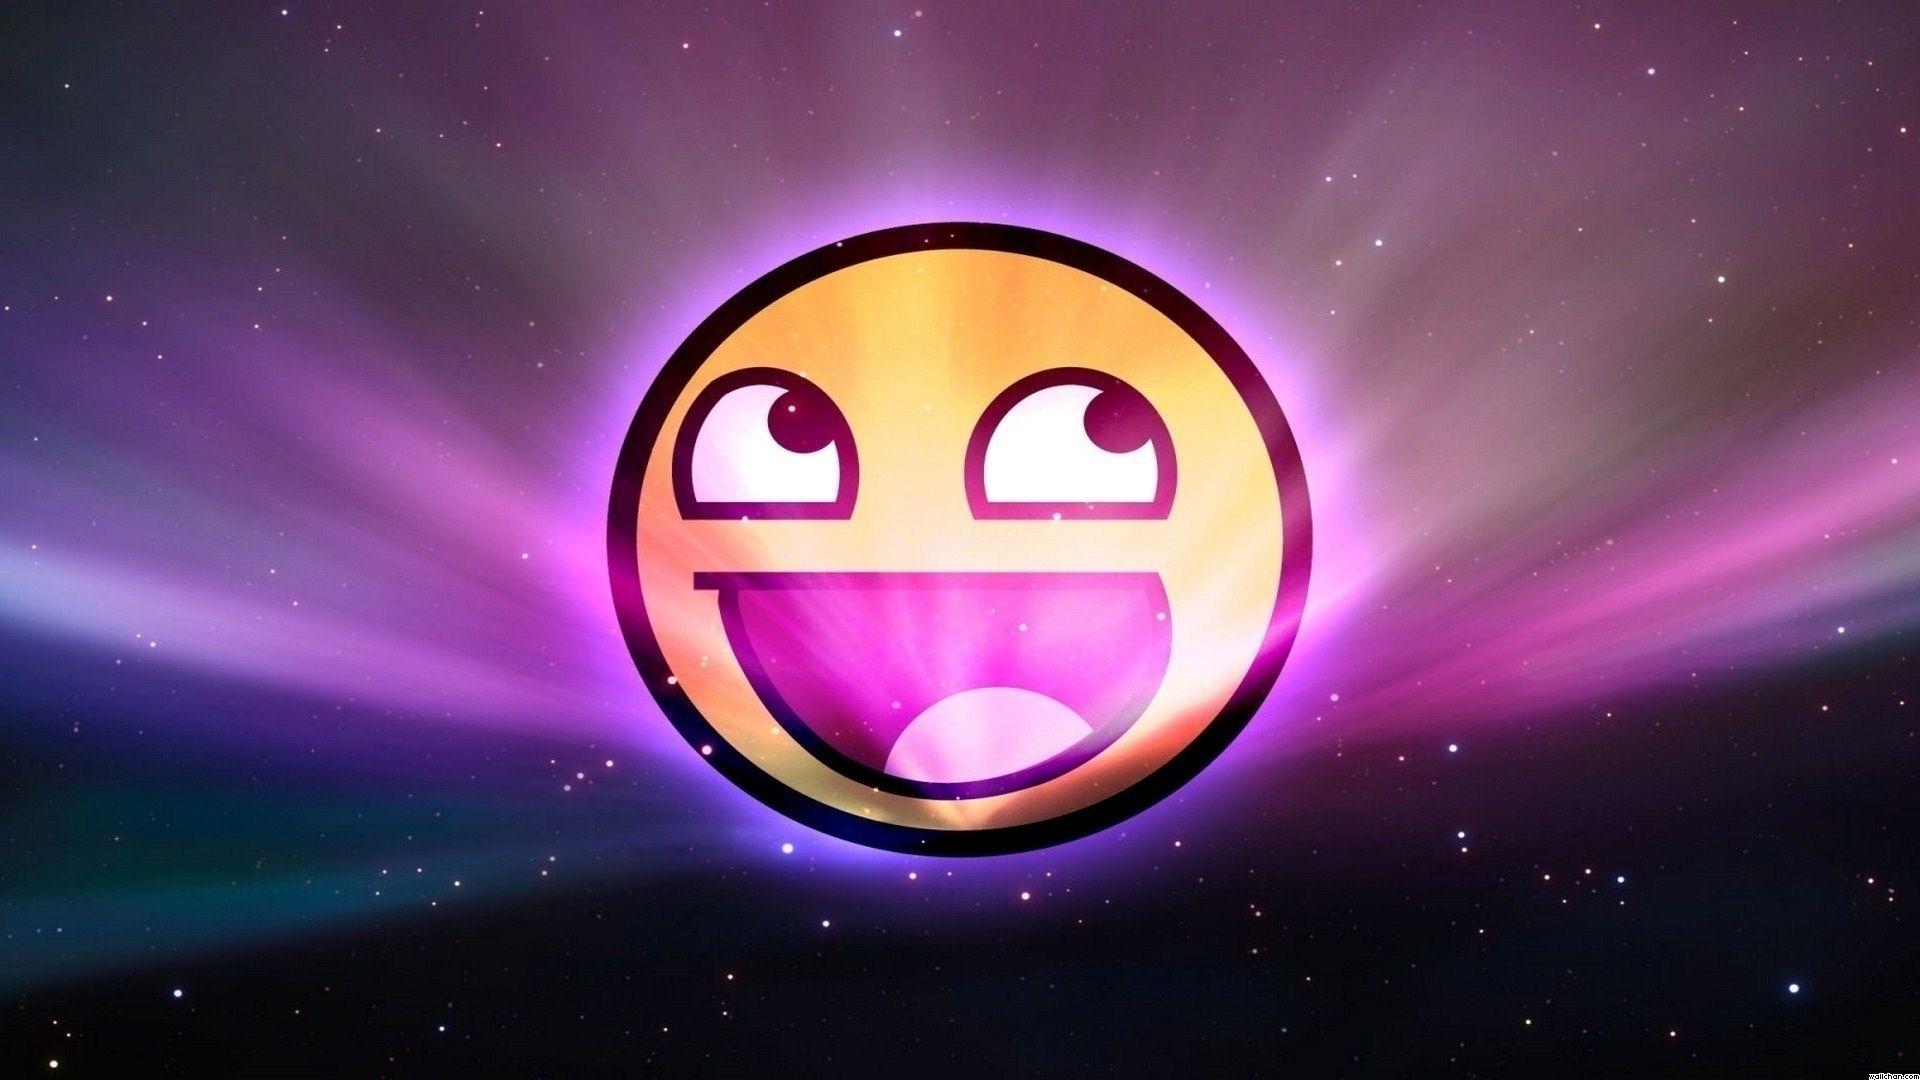 Epic Face Wallpapers For Desktop Wallpaper Cave - epic face roblox wiki